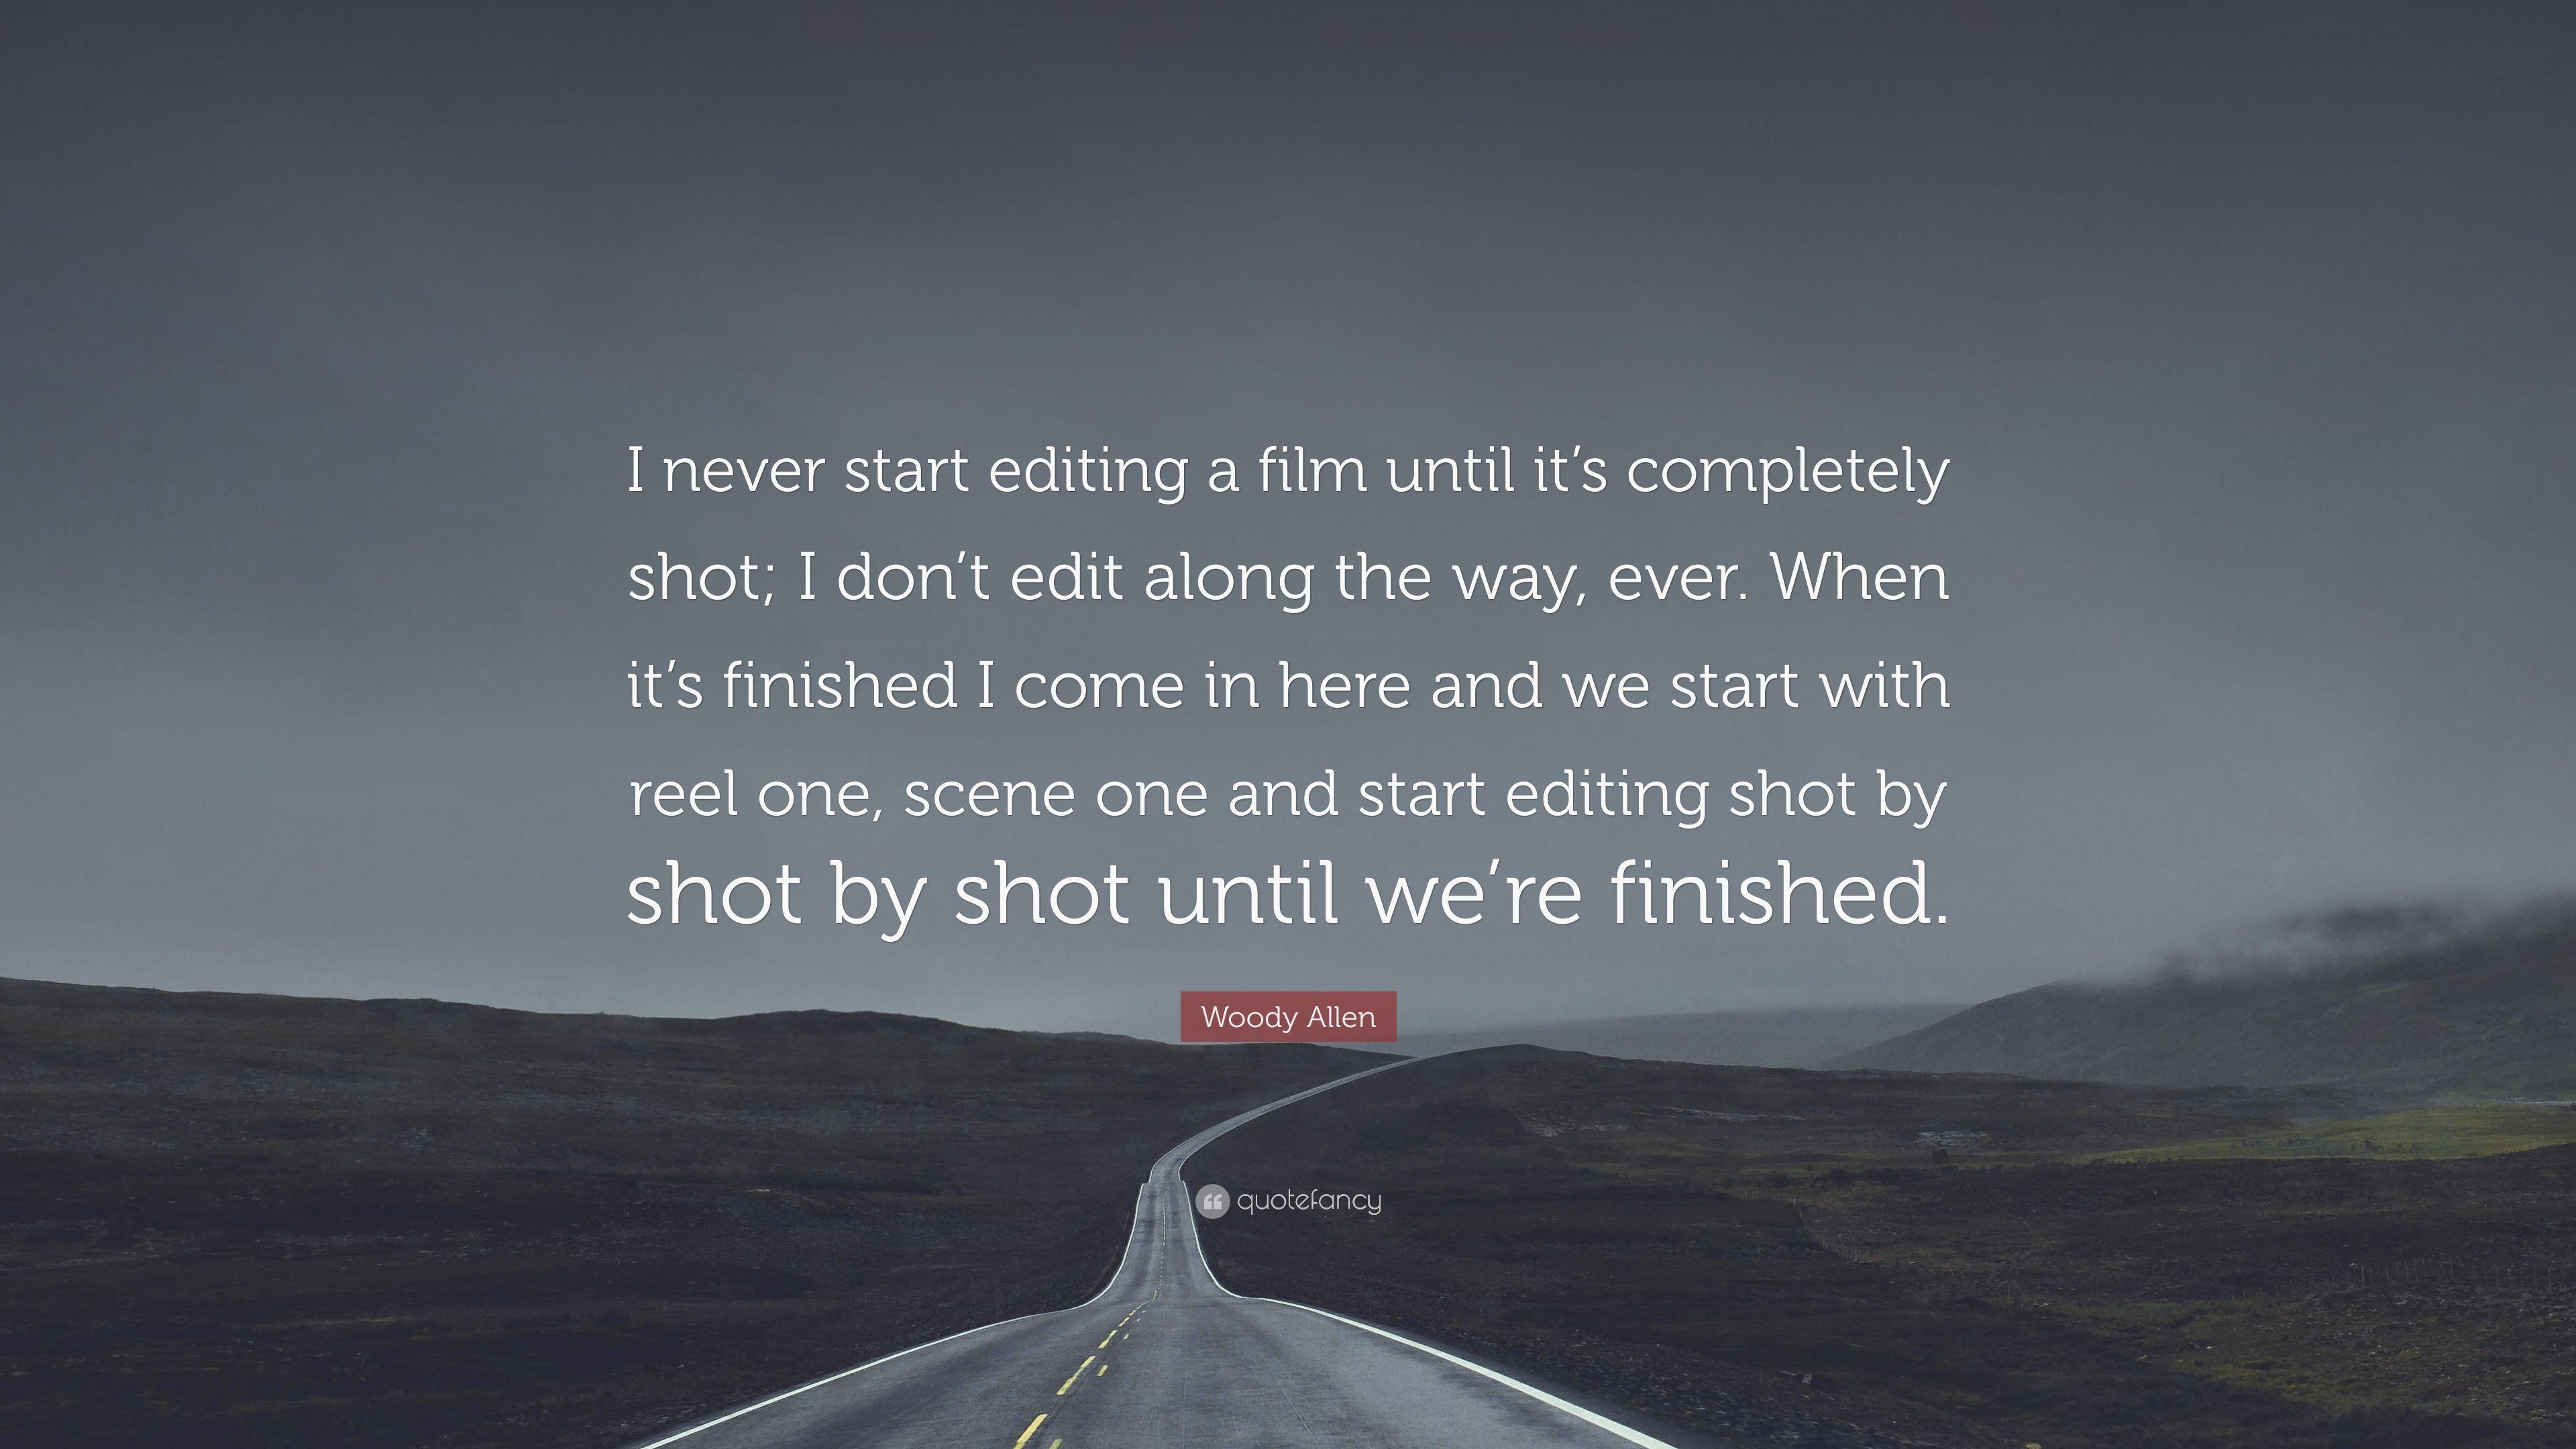 Woody Allen Quote: “I never start editing a film until it's